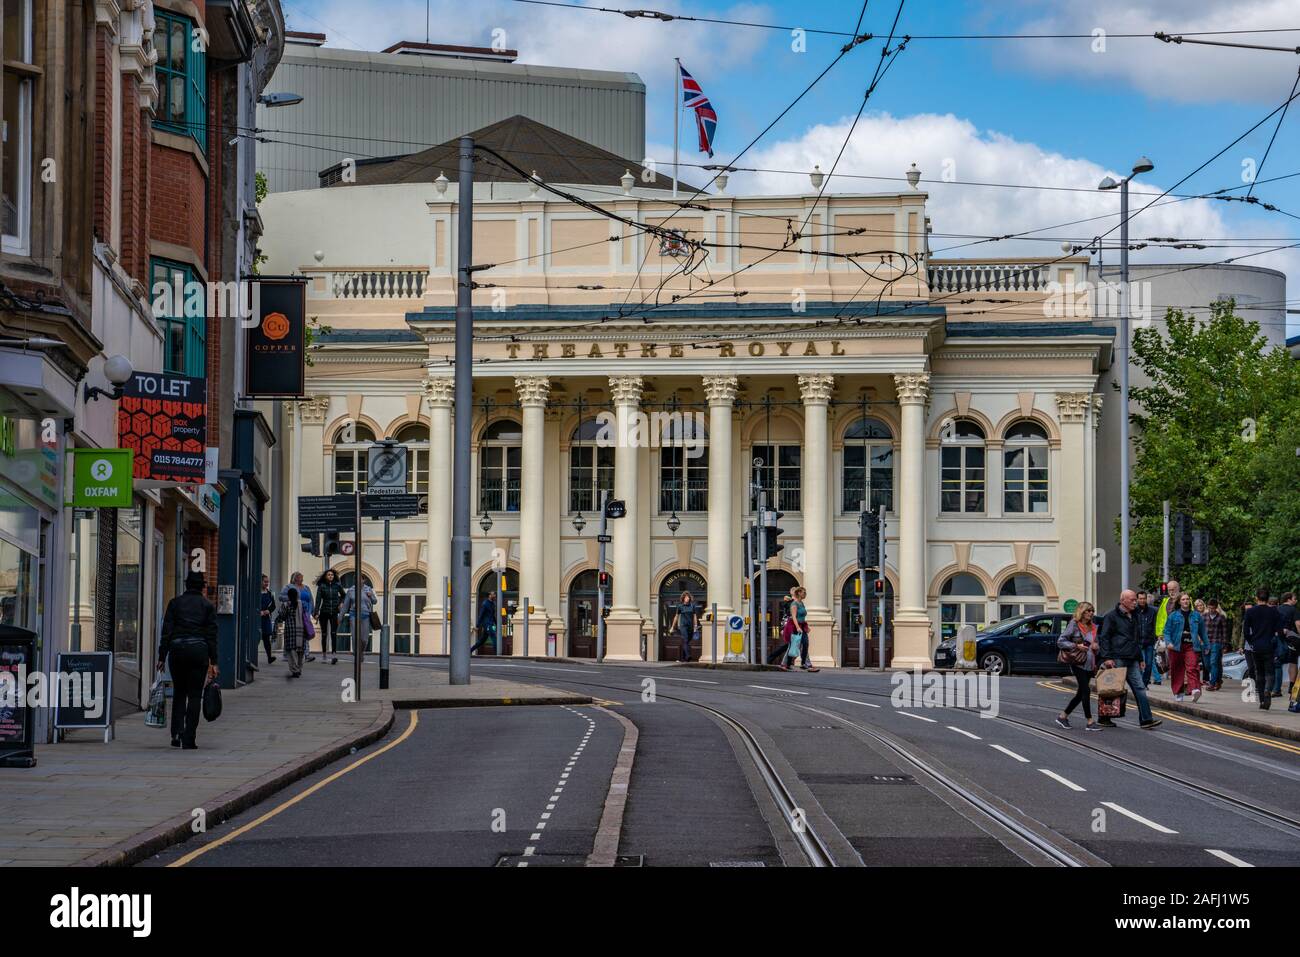 NOTTINGHAM, UNITED KINGDOM - AUGUST 15: View of the Theatre Royal building, a landmark building used for theatre performances on August 15, 2019 in No Stock Photo